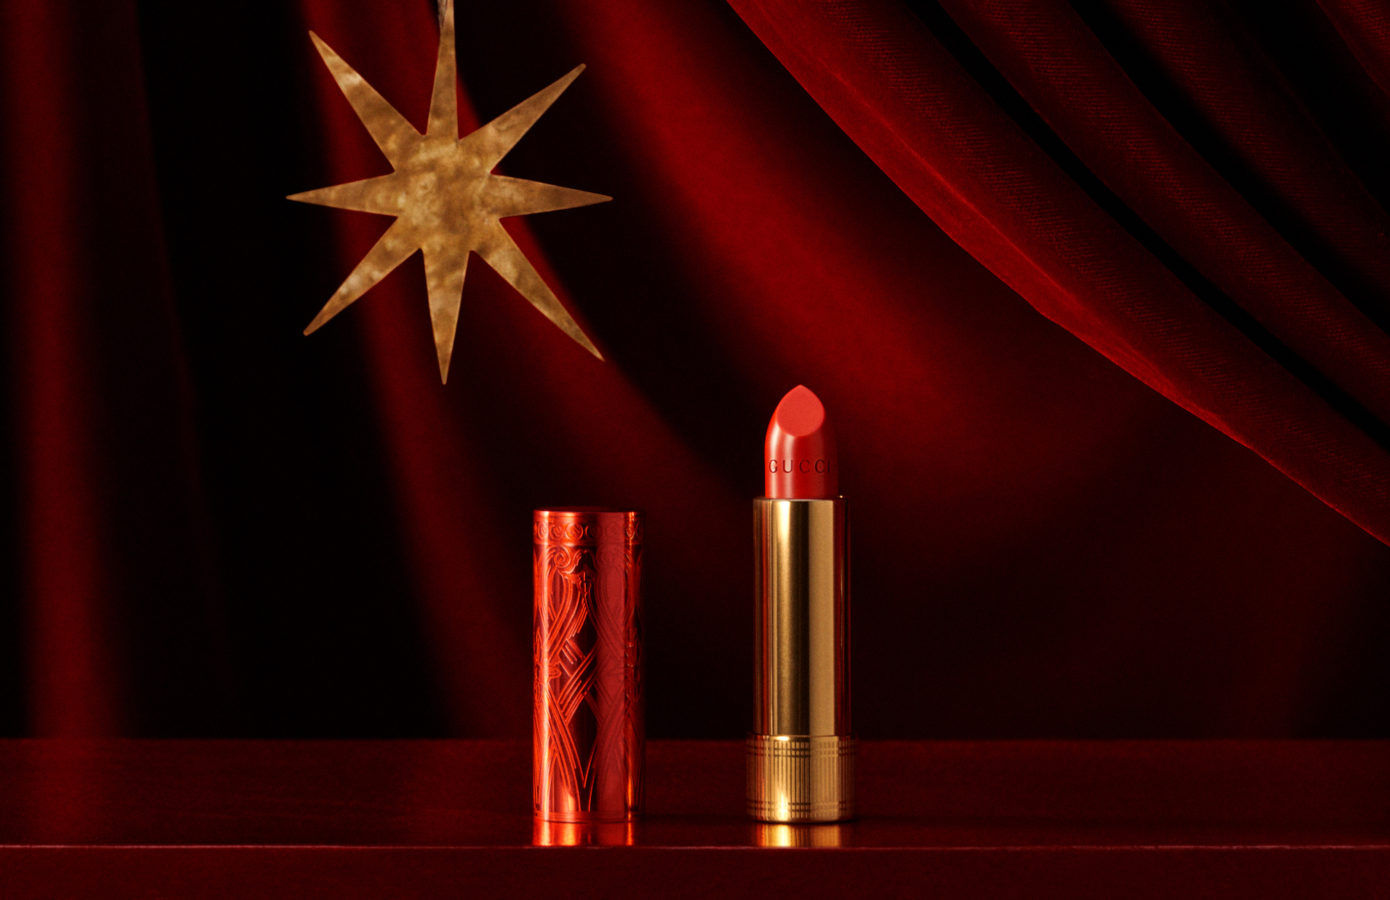 Look your best this Lunar New Year with these limited edition beauty specials